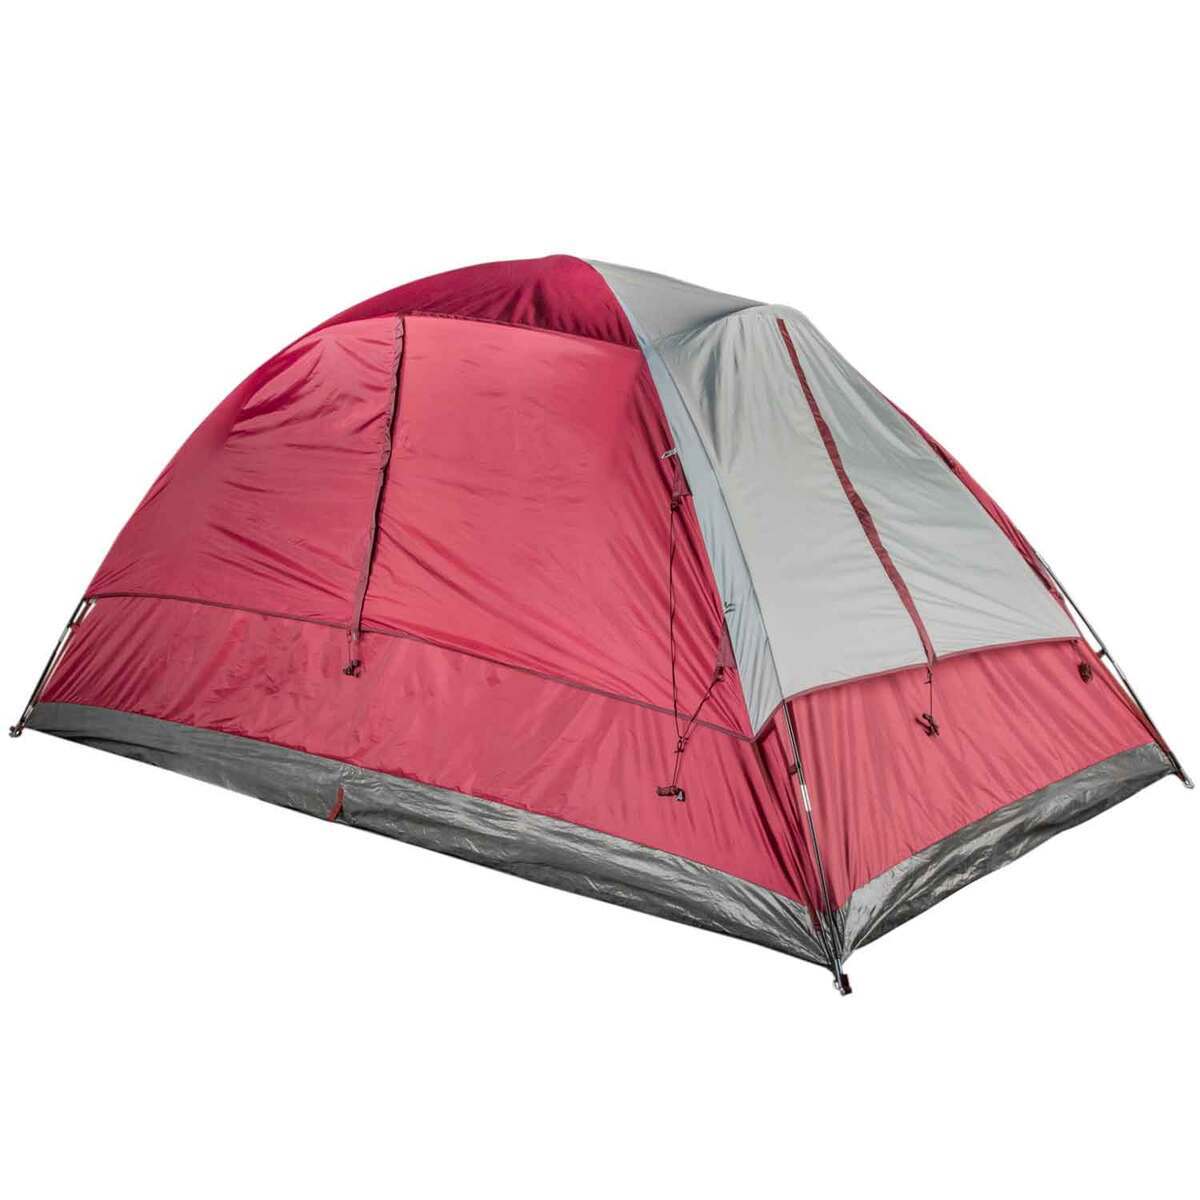 Rustic Ridge Dome 8-Person Camping Tent - Maroon | Sportsman's Warehouse